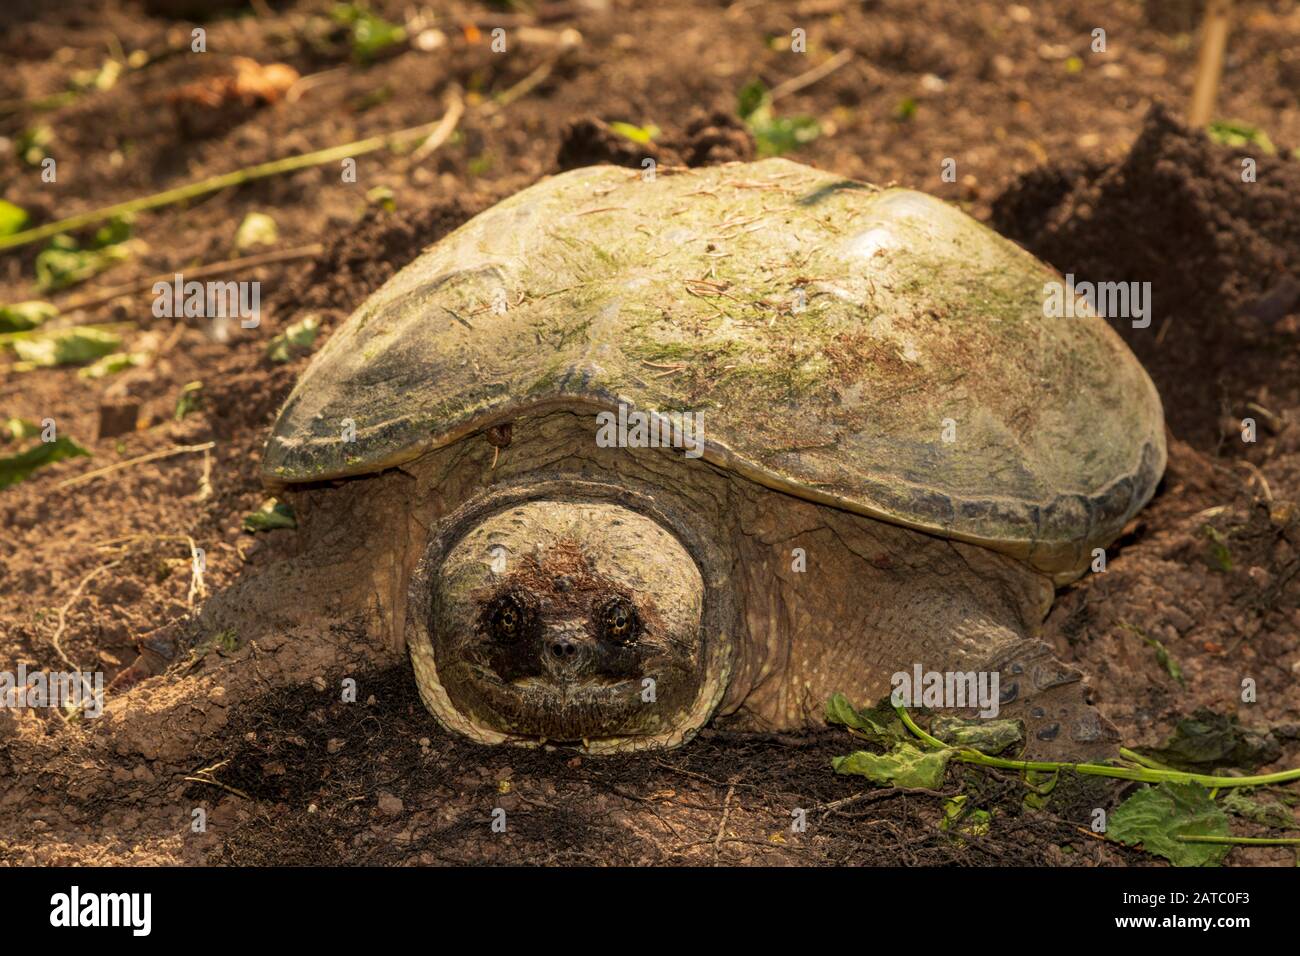 Female Snapping Turtle Laying Her Eggs in a Garden During Fall Stock Photo